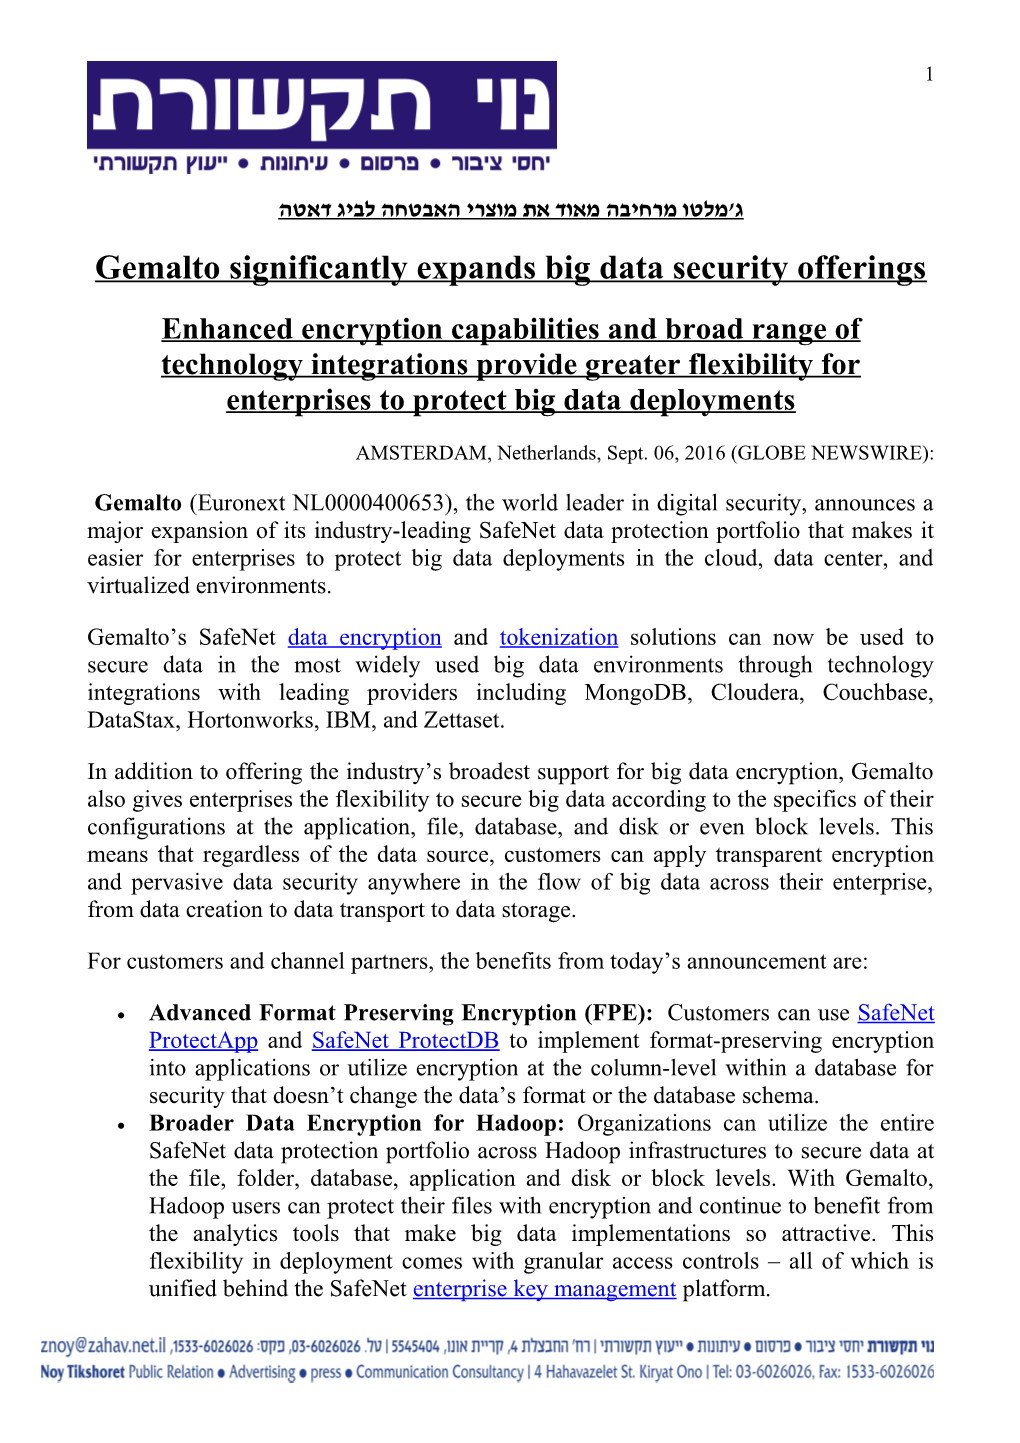 Gemalto Significantly Expands Big Data Security Offerings